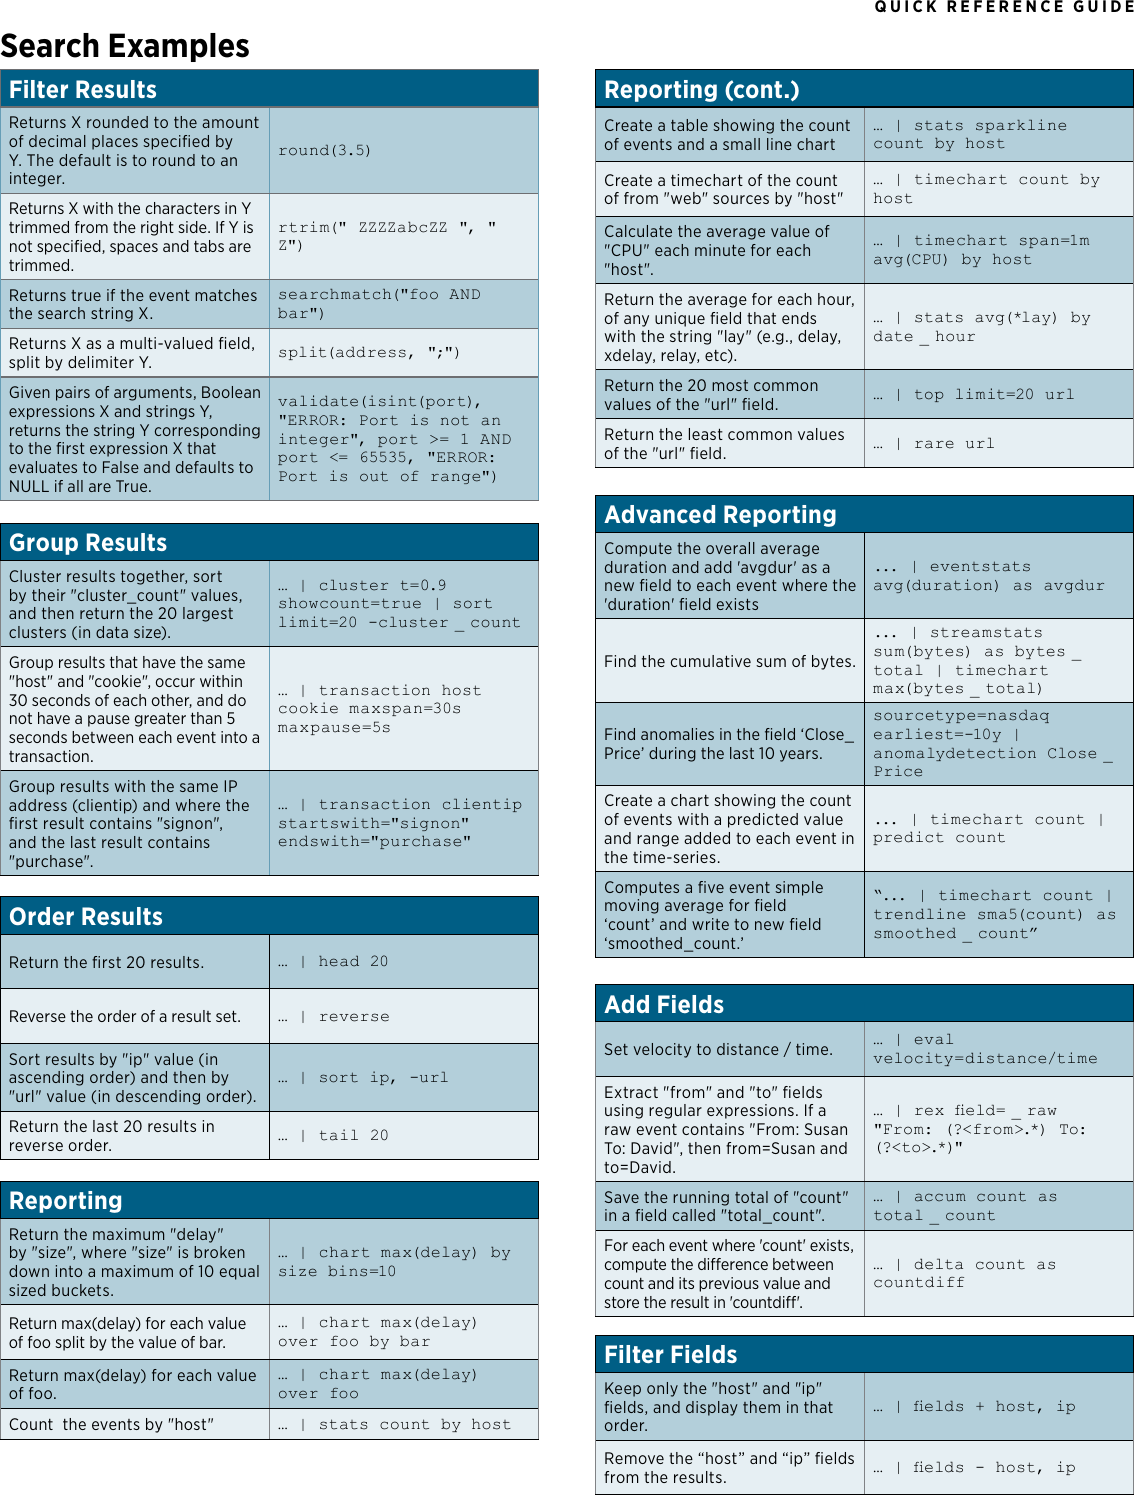 Page 5 of 6 - Splunk-quick-reference-guide